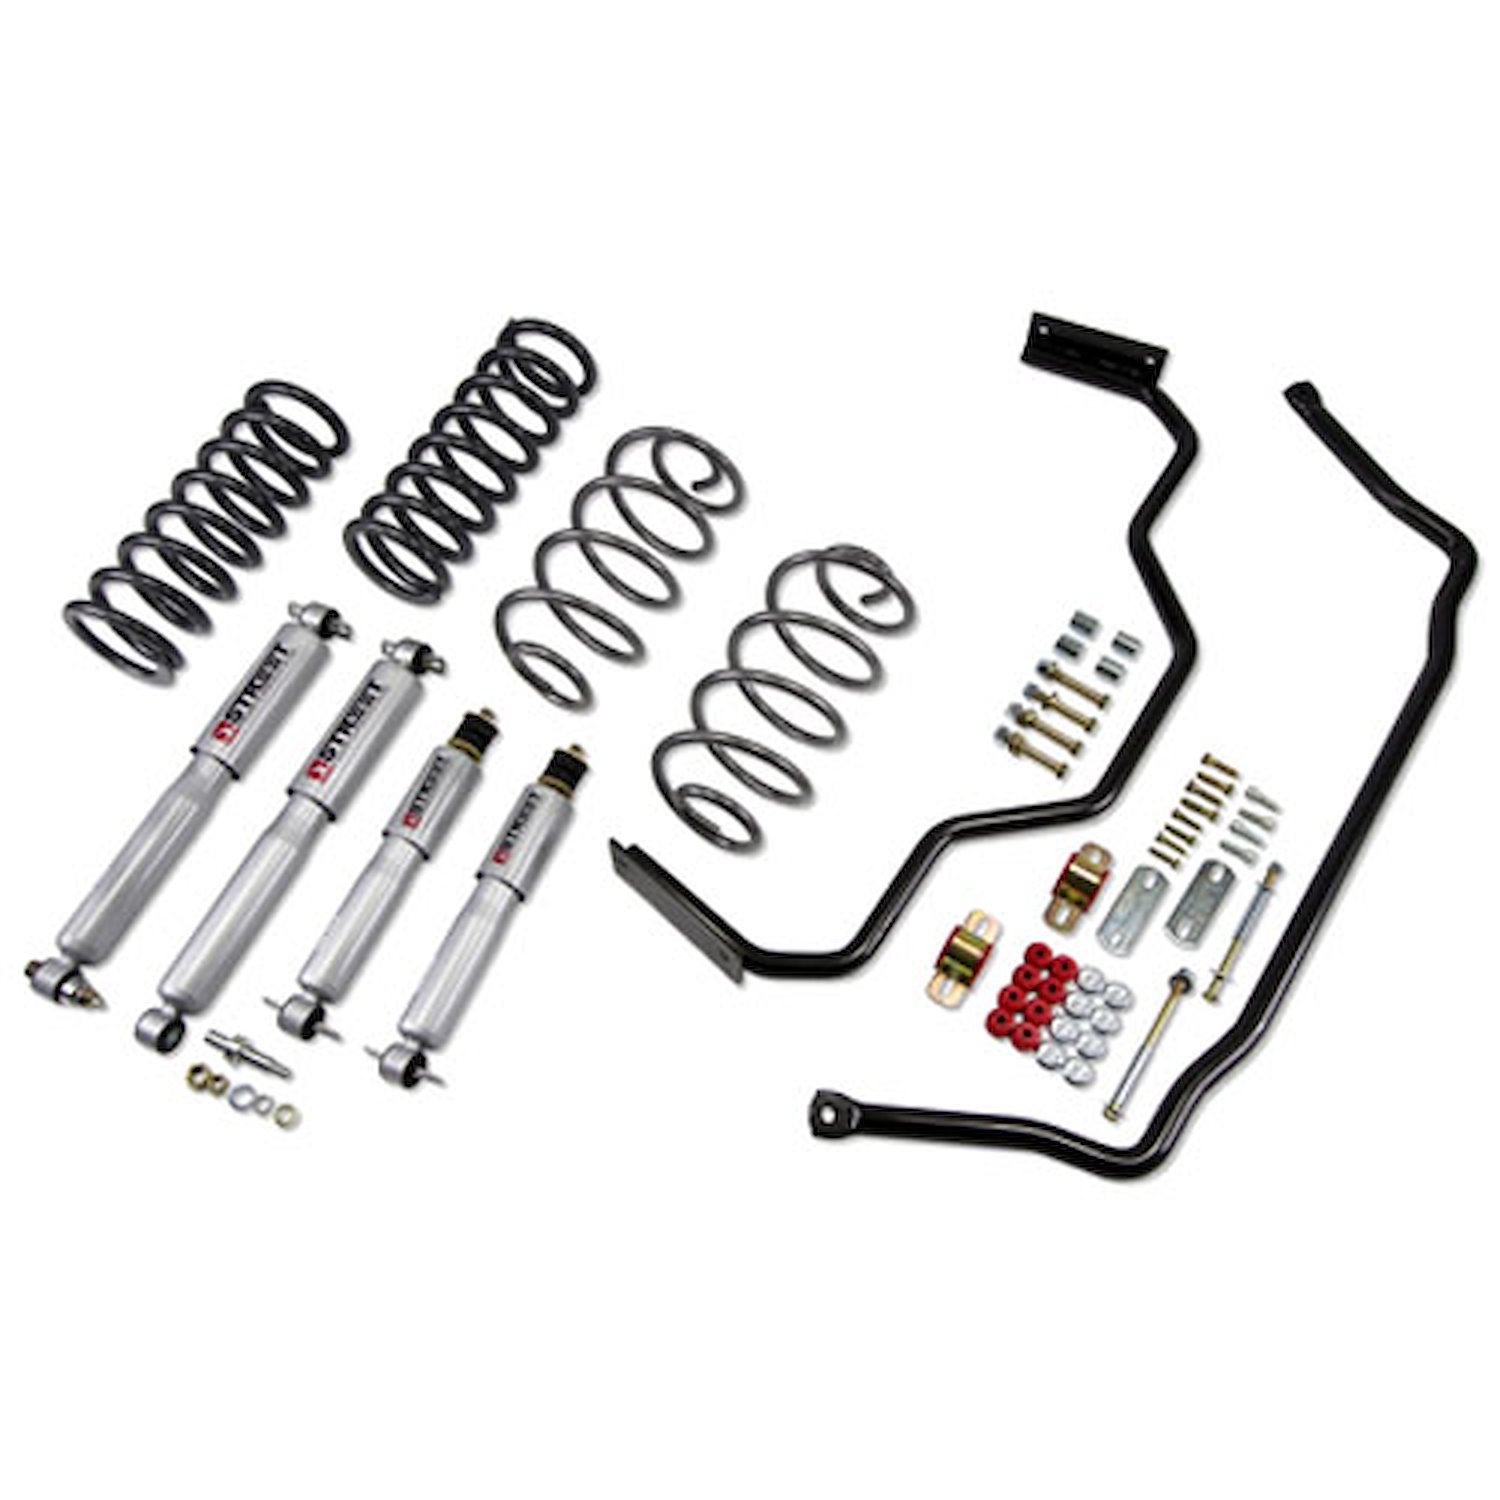 Muscle Car Suspension Kit for 1978-1987 Oldsmobile Cutlass